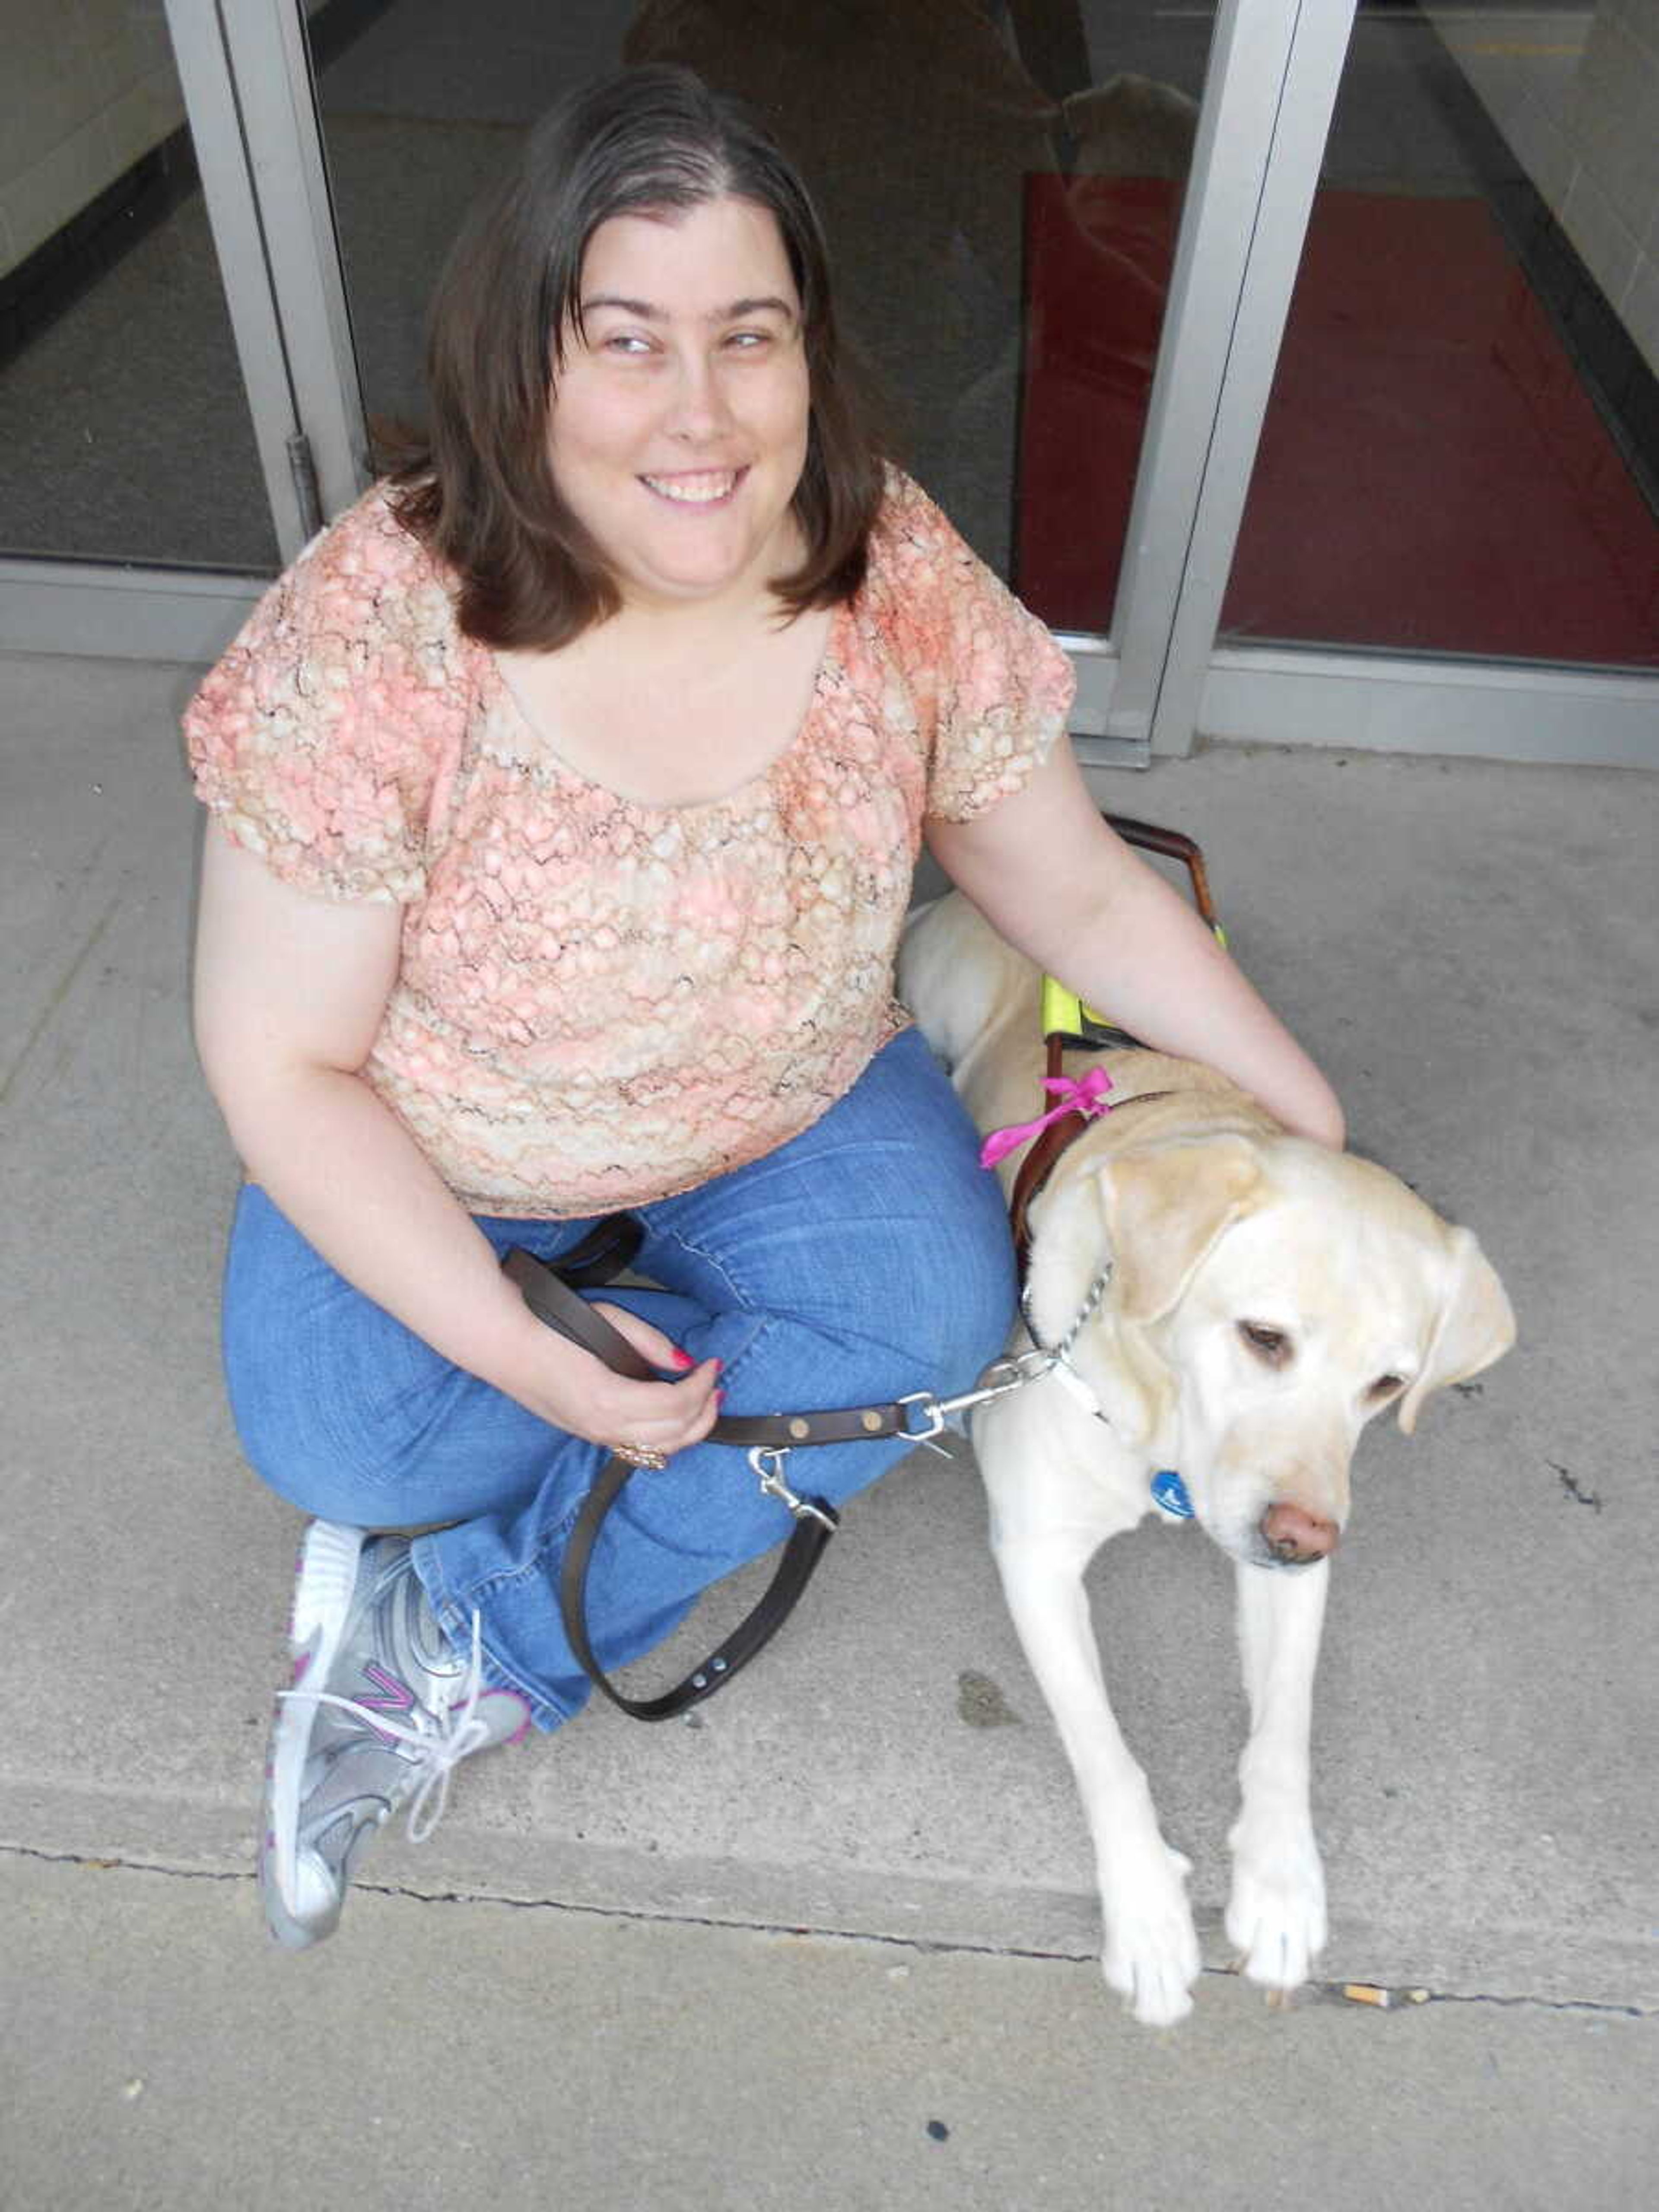 Sindy Puckett and her dog Elanor will walk at graduation together. - Submitted photos